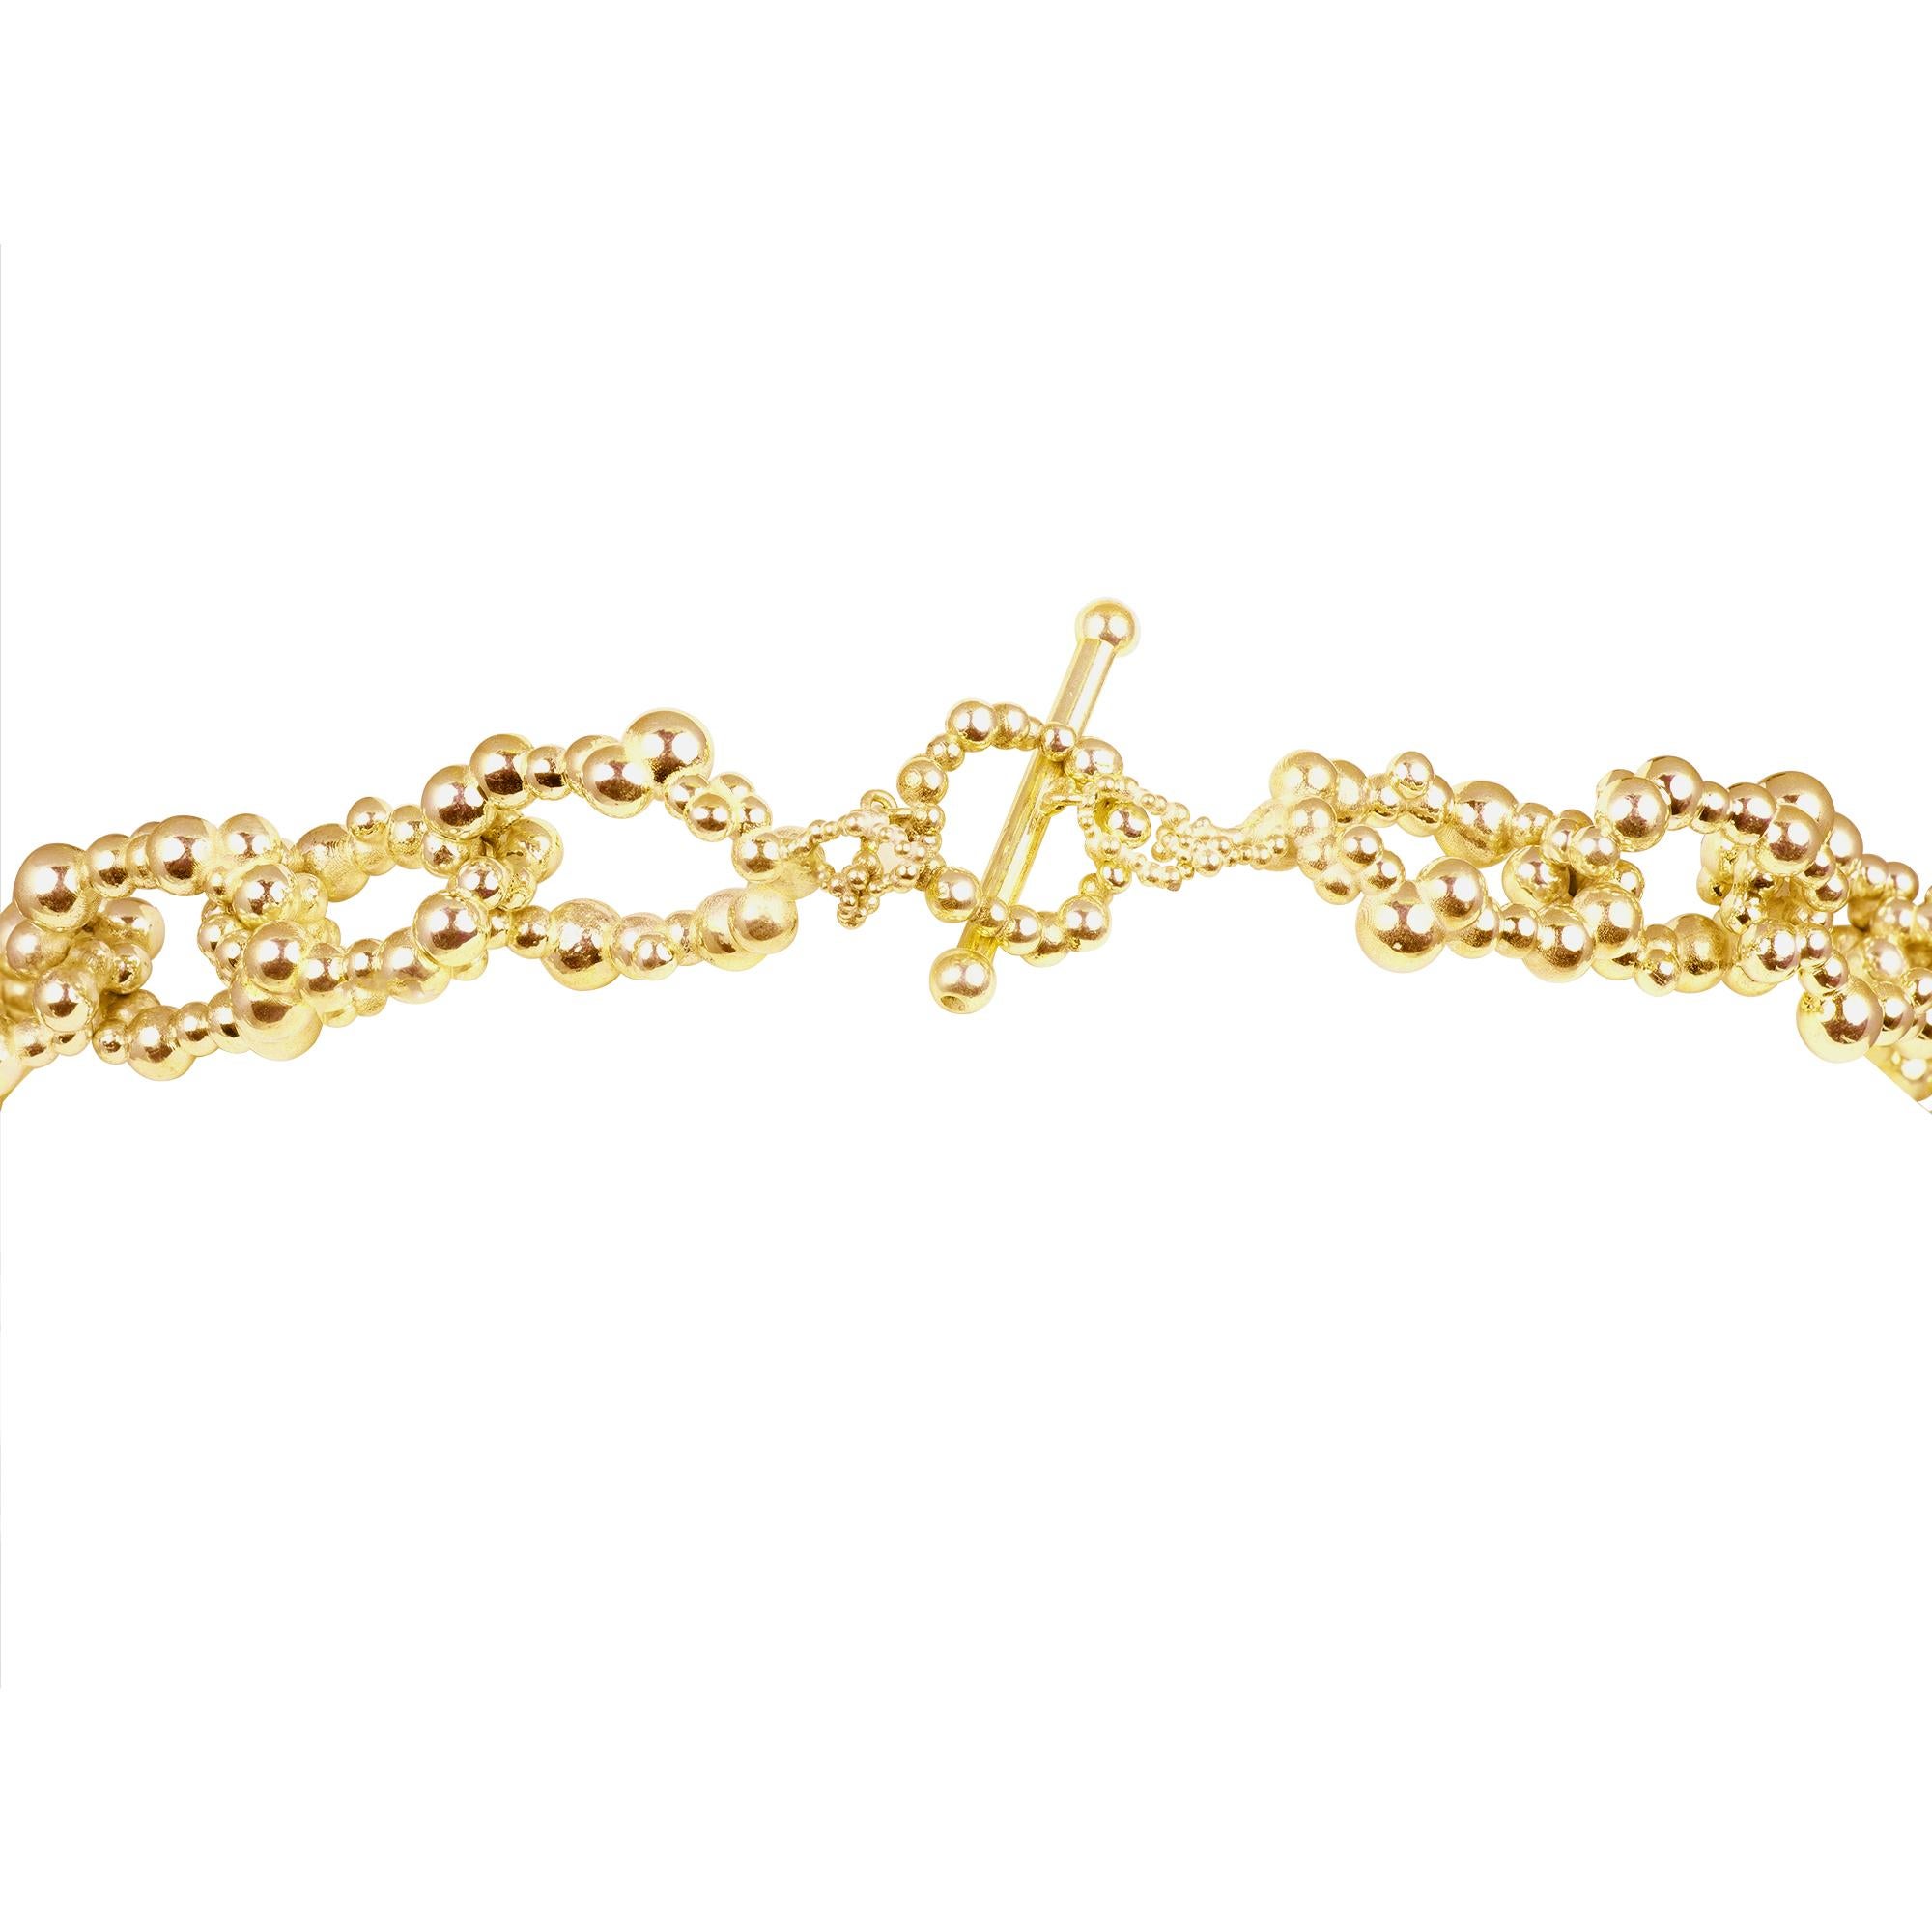 14karat yellow gold signature Costolo texture, solid link necklace. 16inches total length. Made by hand in los angles.